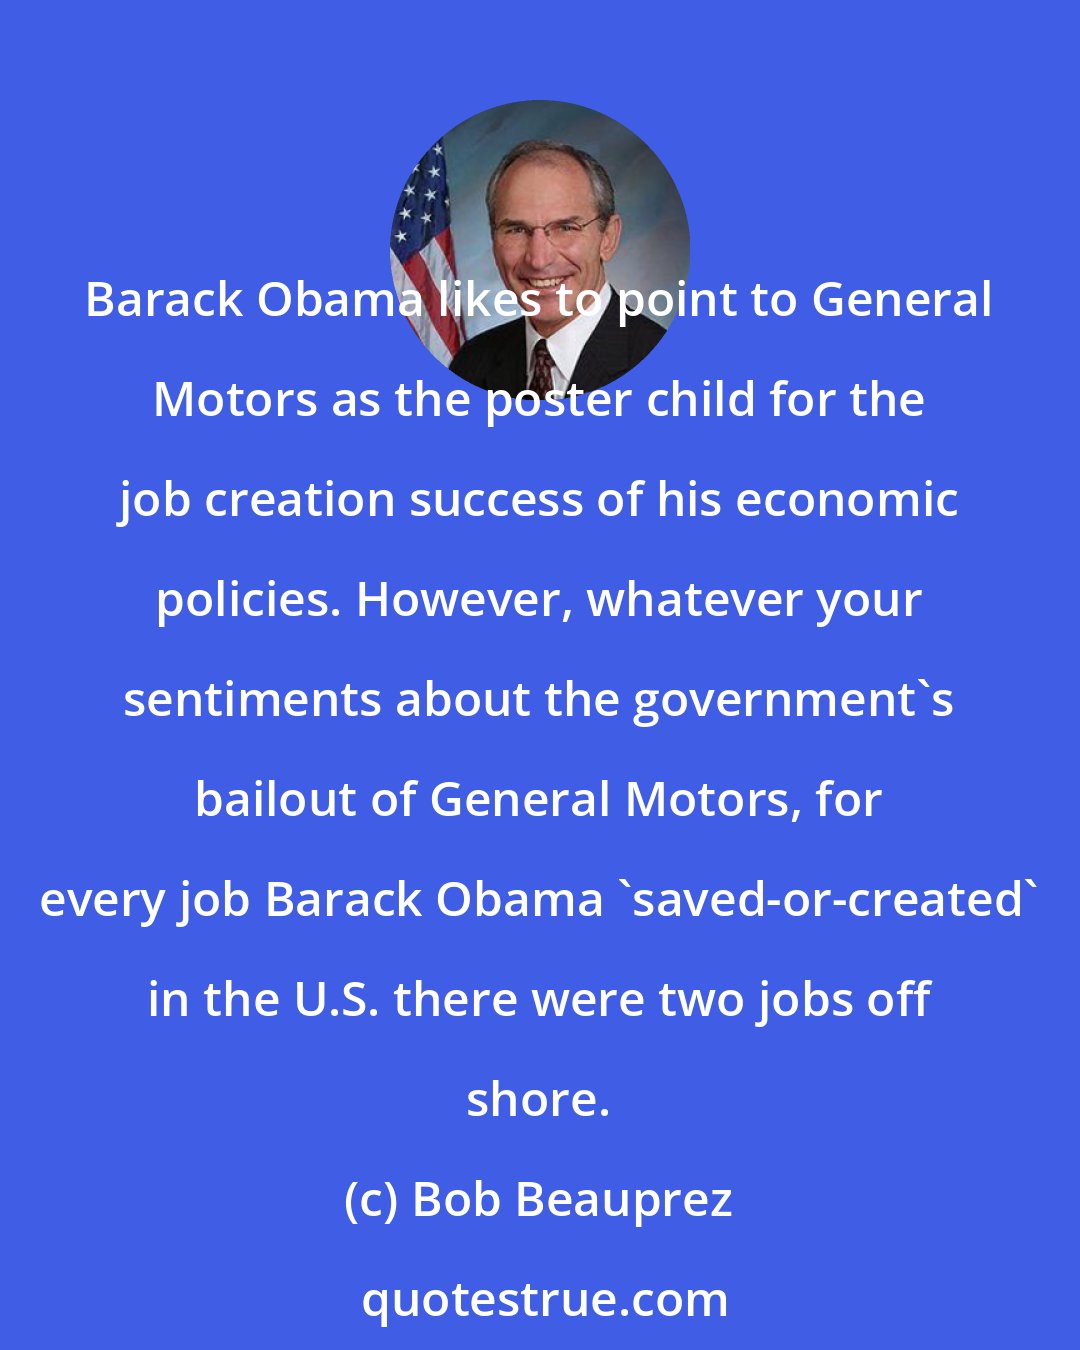 Bob Beauprez: Barack Obama likes to point to General Motors as the poster child for the job creation success of his economic policies. However, whatever your sentiments about the government's bailout of General Motors, for every job Barack Obama 'saved-or-created' in the U.S. there were two jobs off shore.